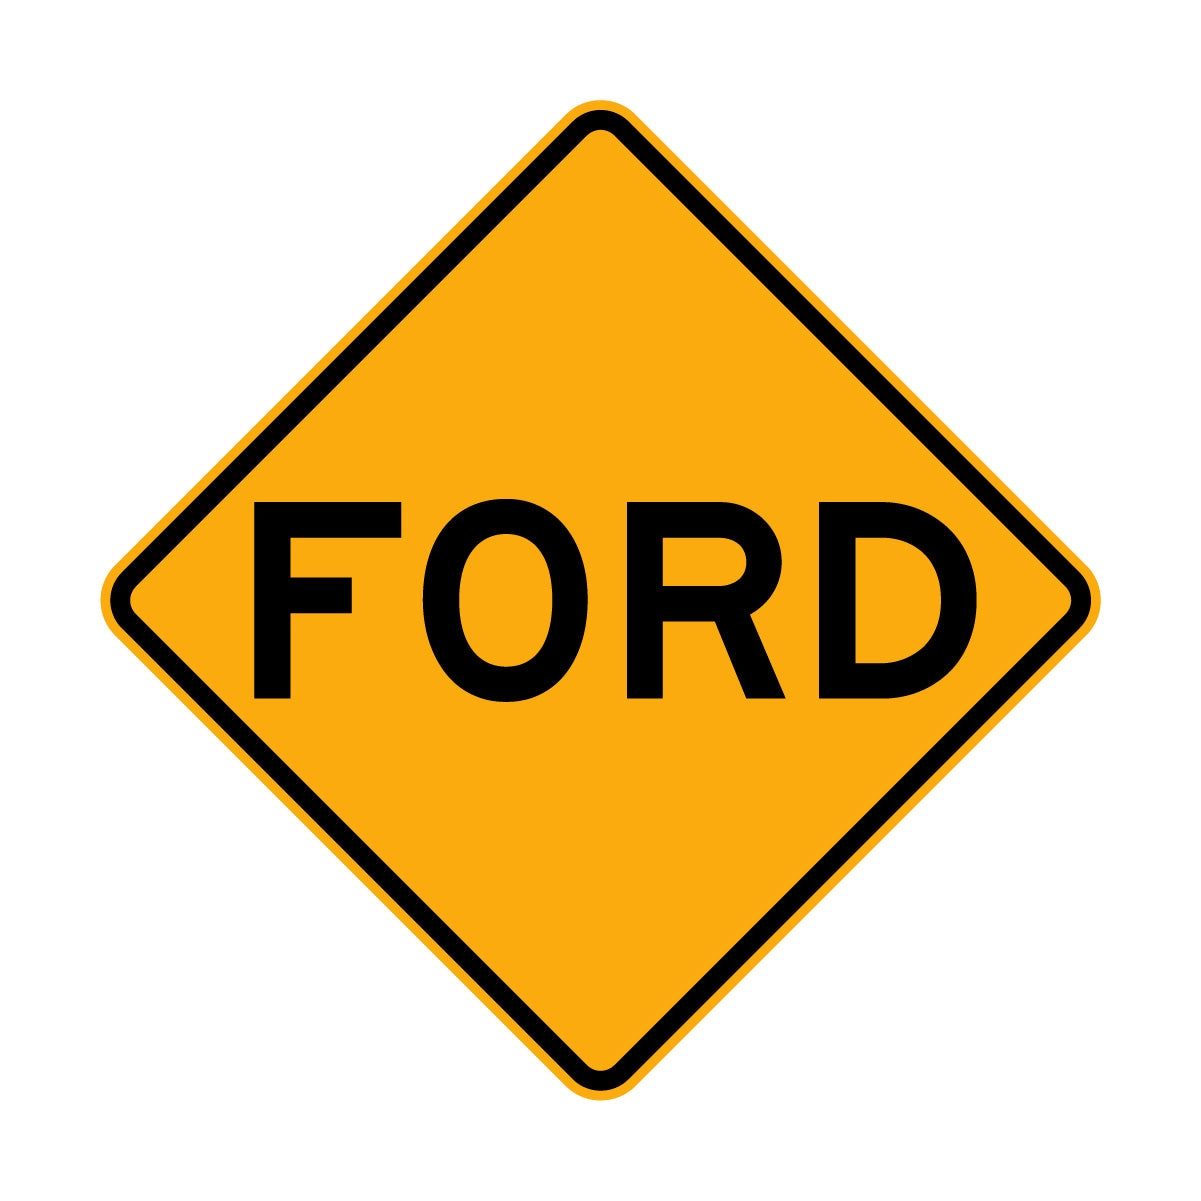 Warning: Ford Sign